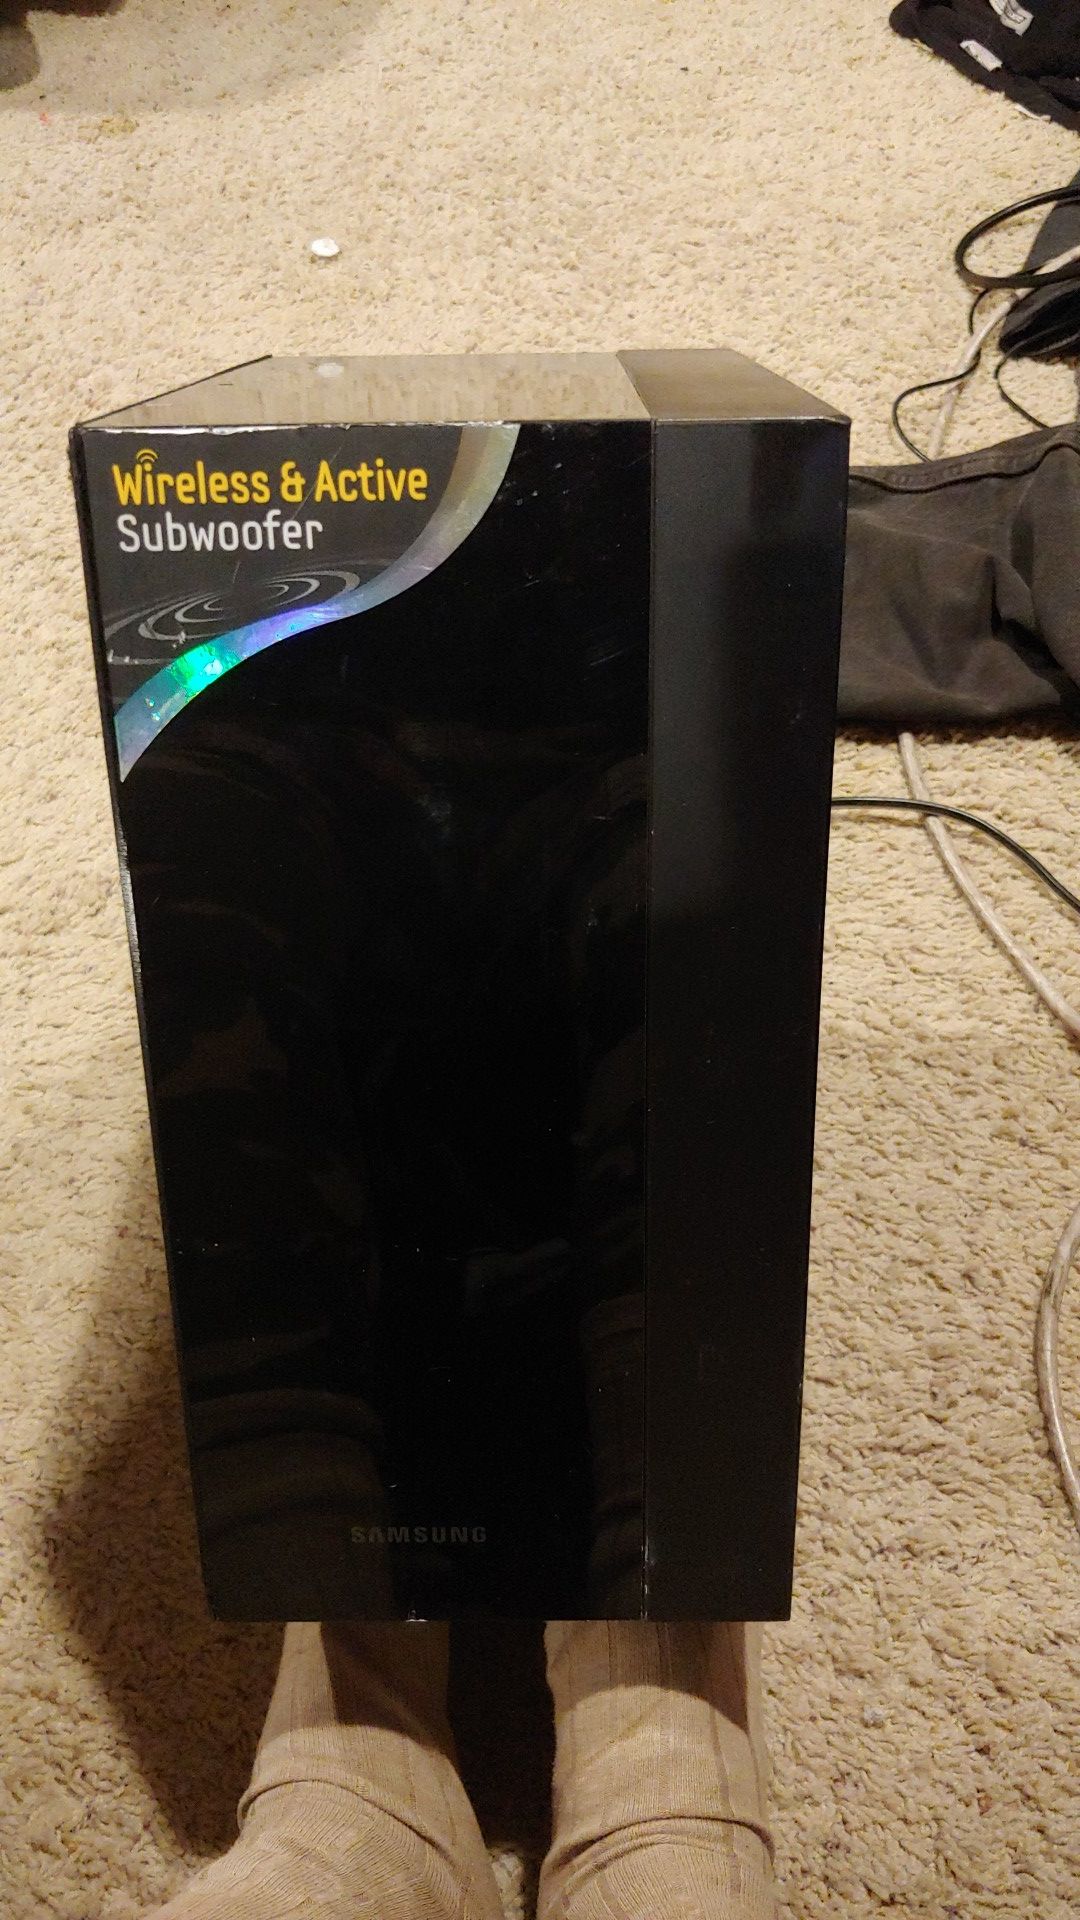 Wireless and active subwoofer